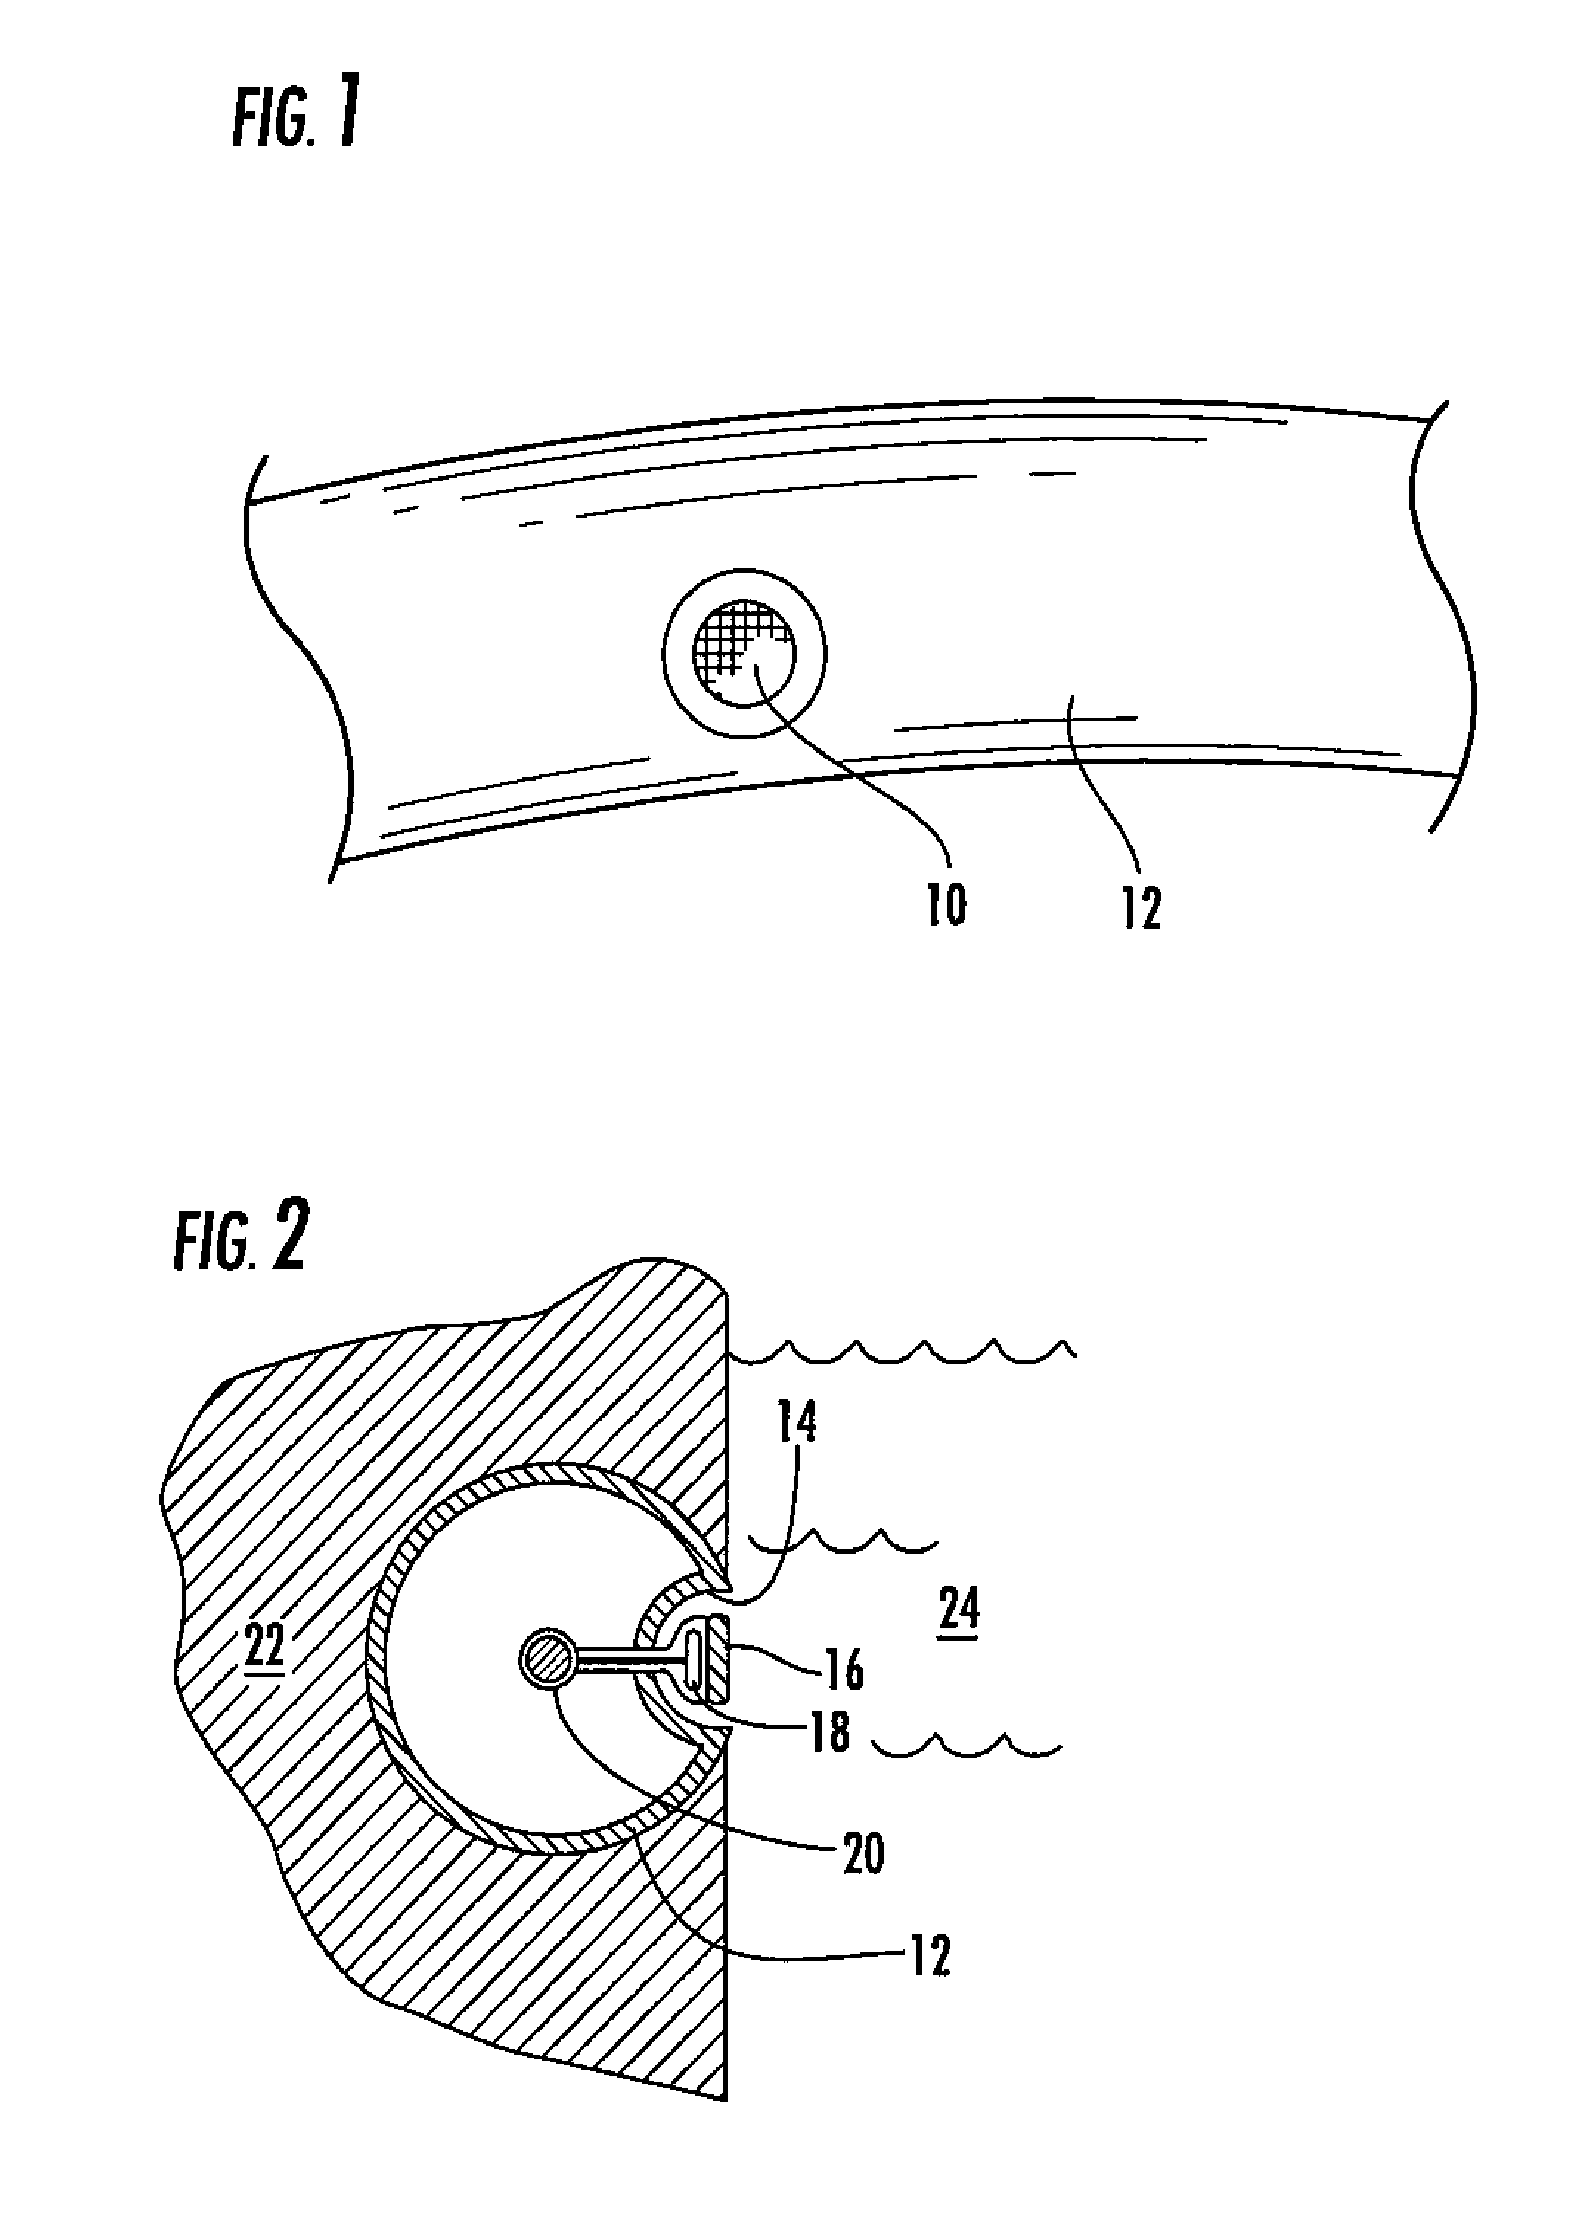 Method and System for Controlling Light Fixtures